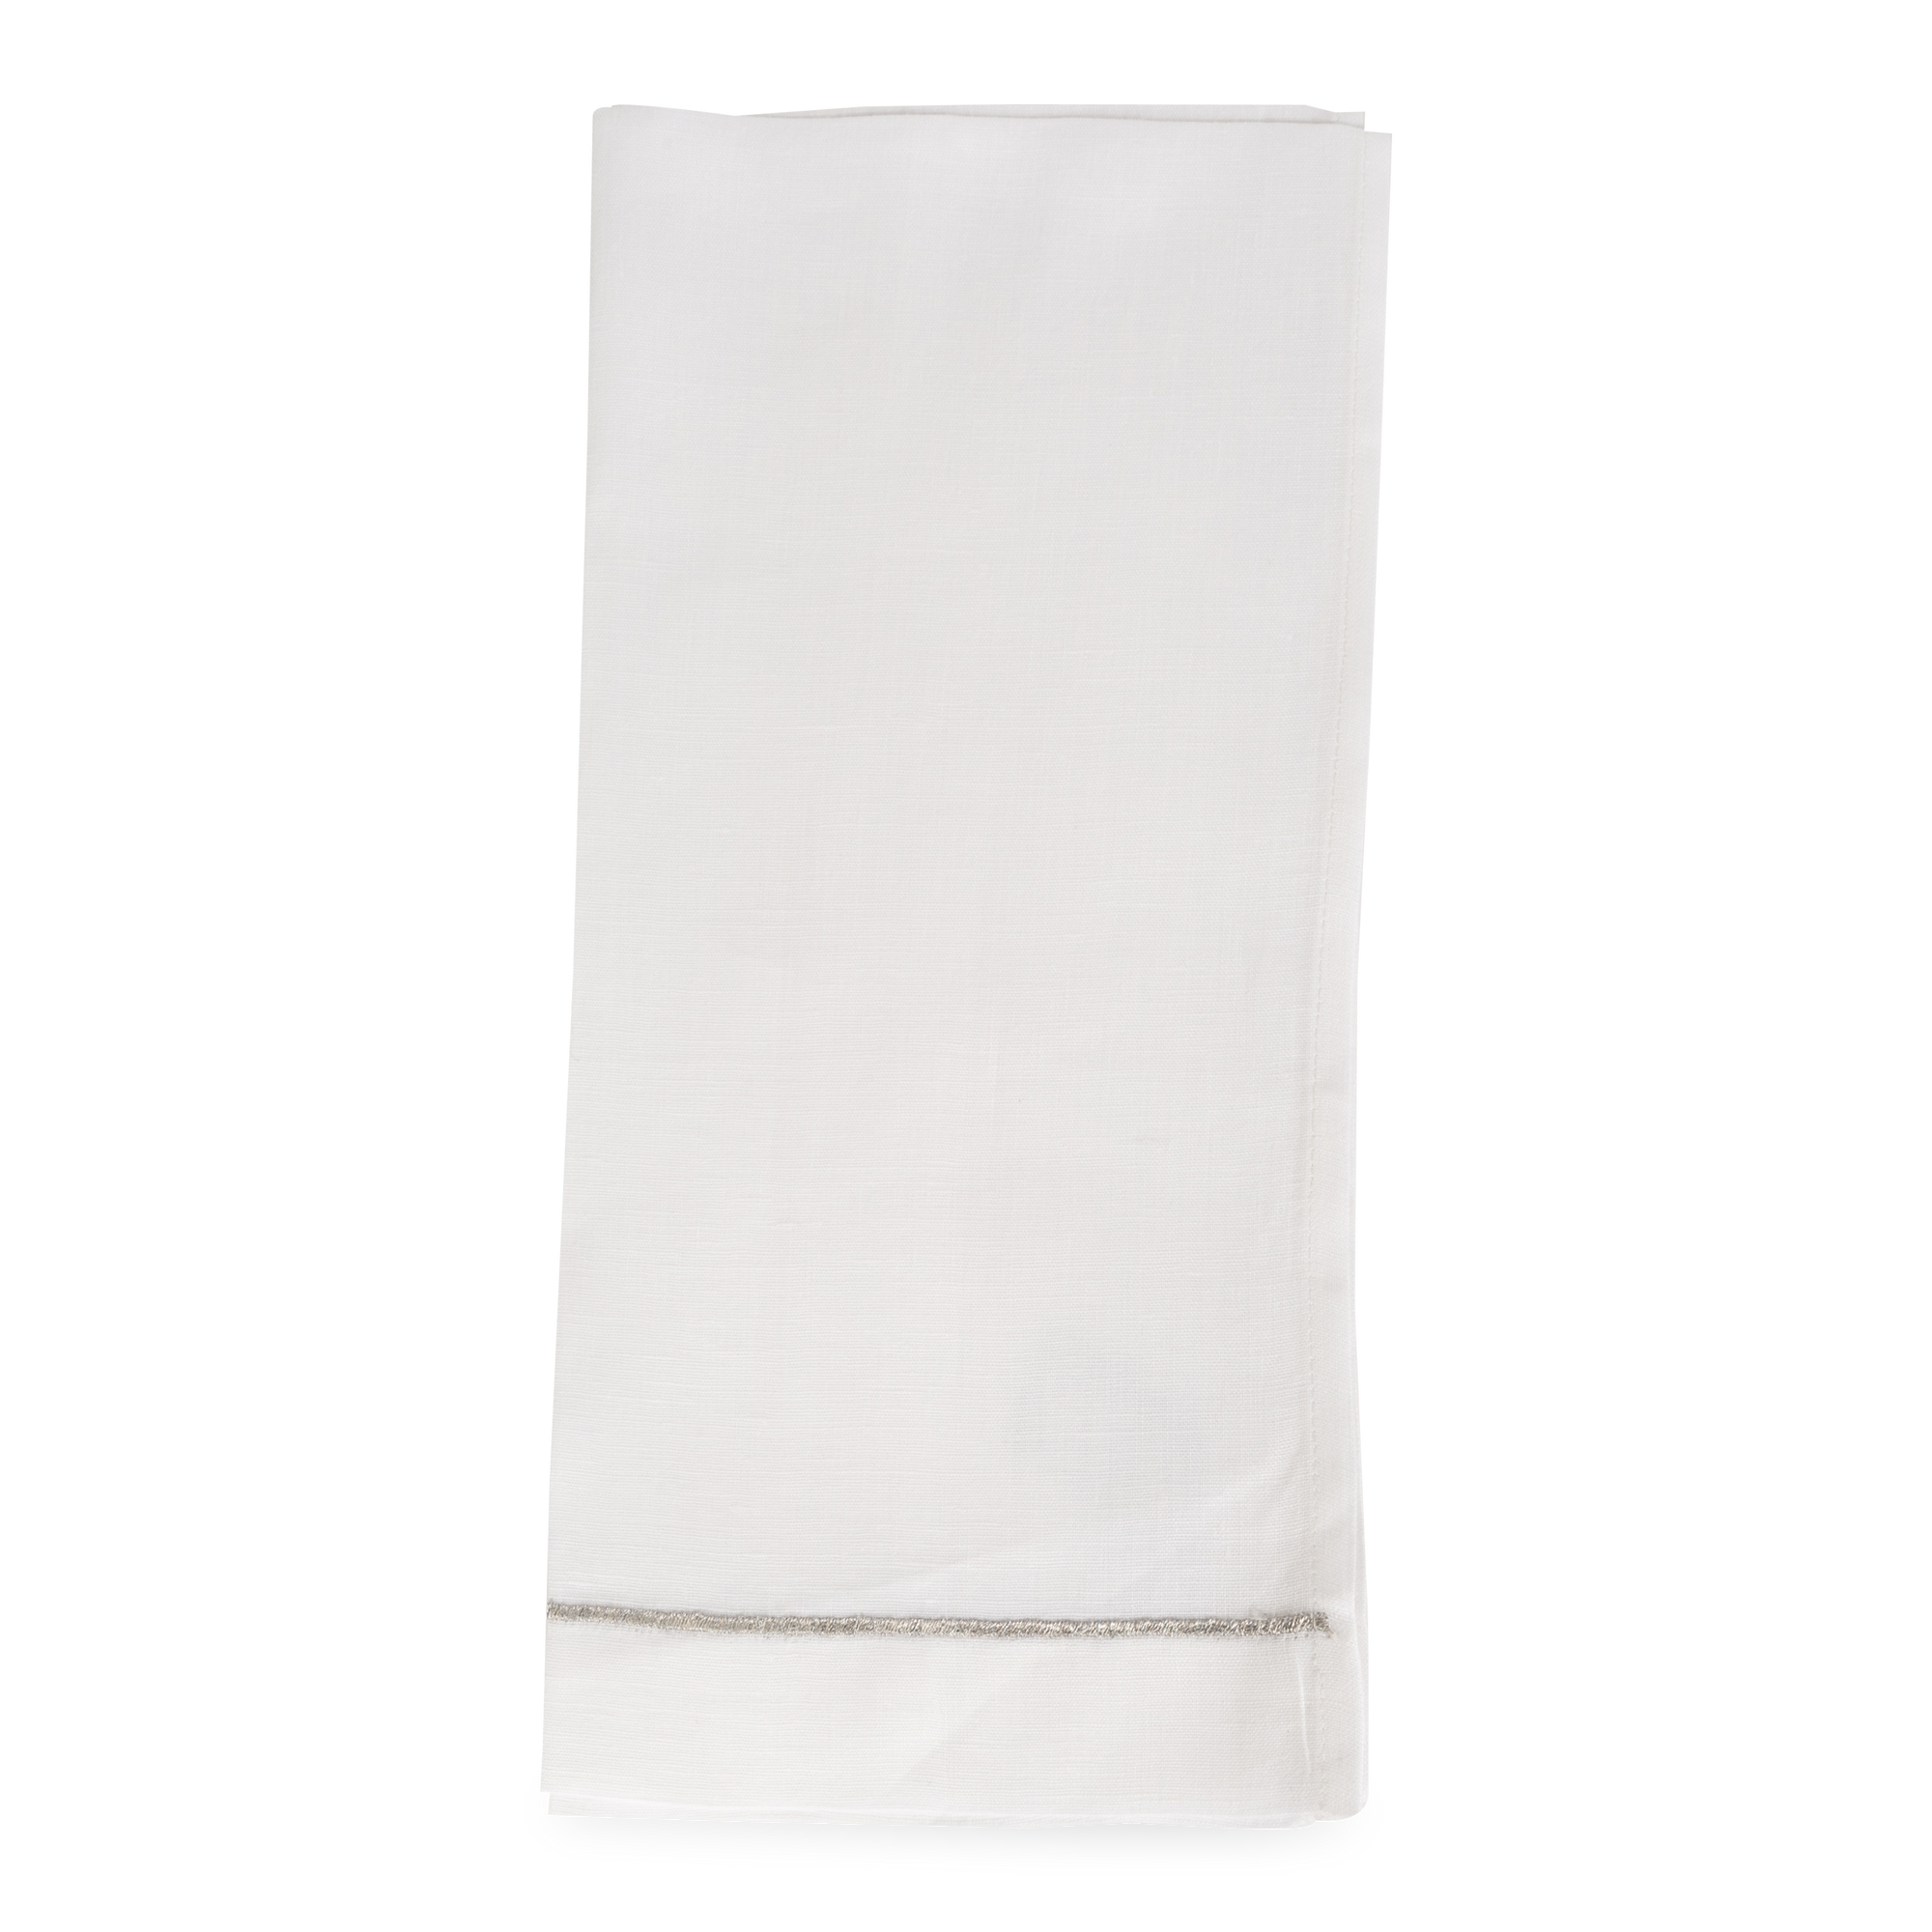 This 100% Linen Guest towel features a decorative embroidered accent.